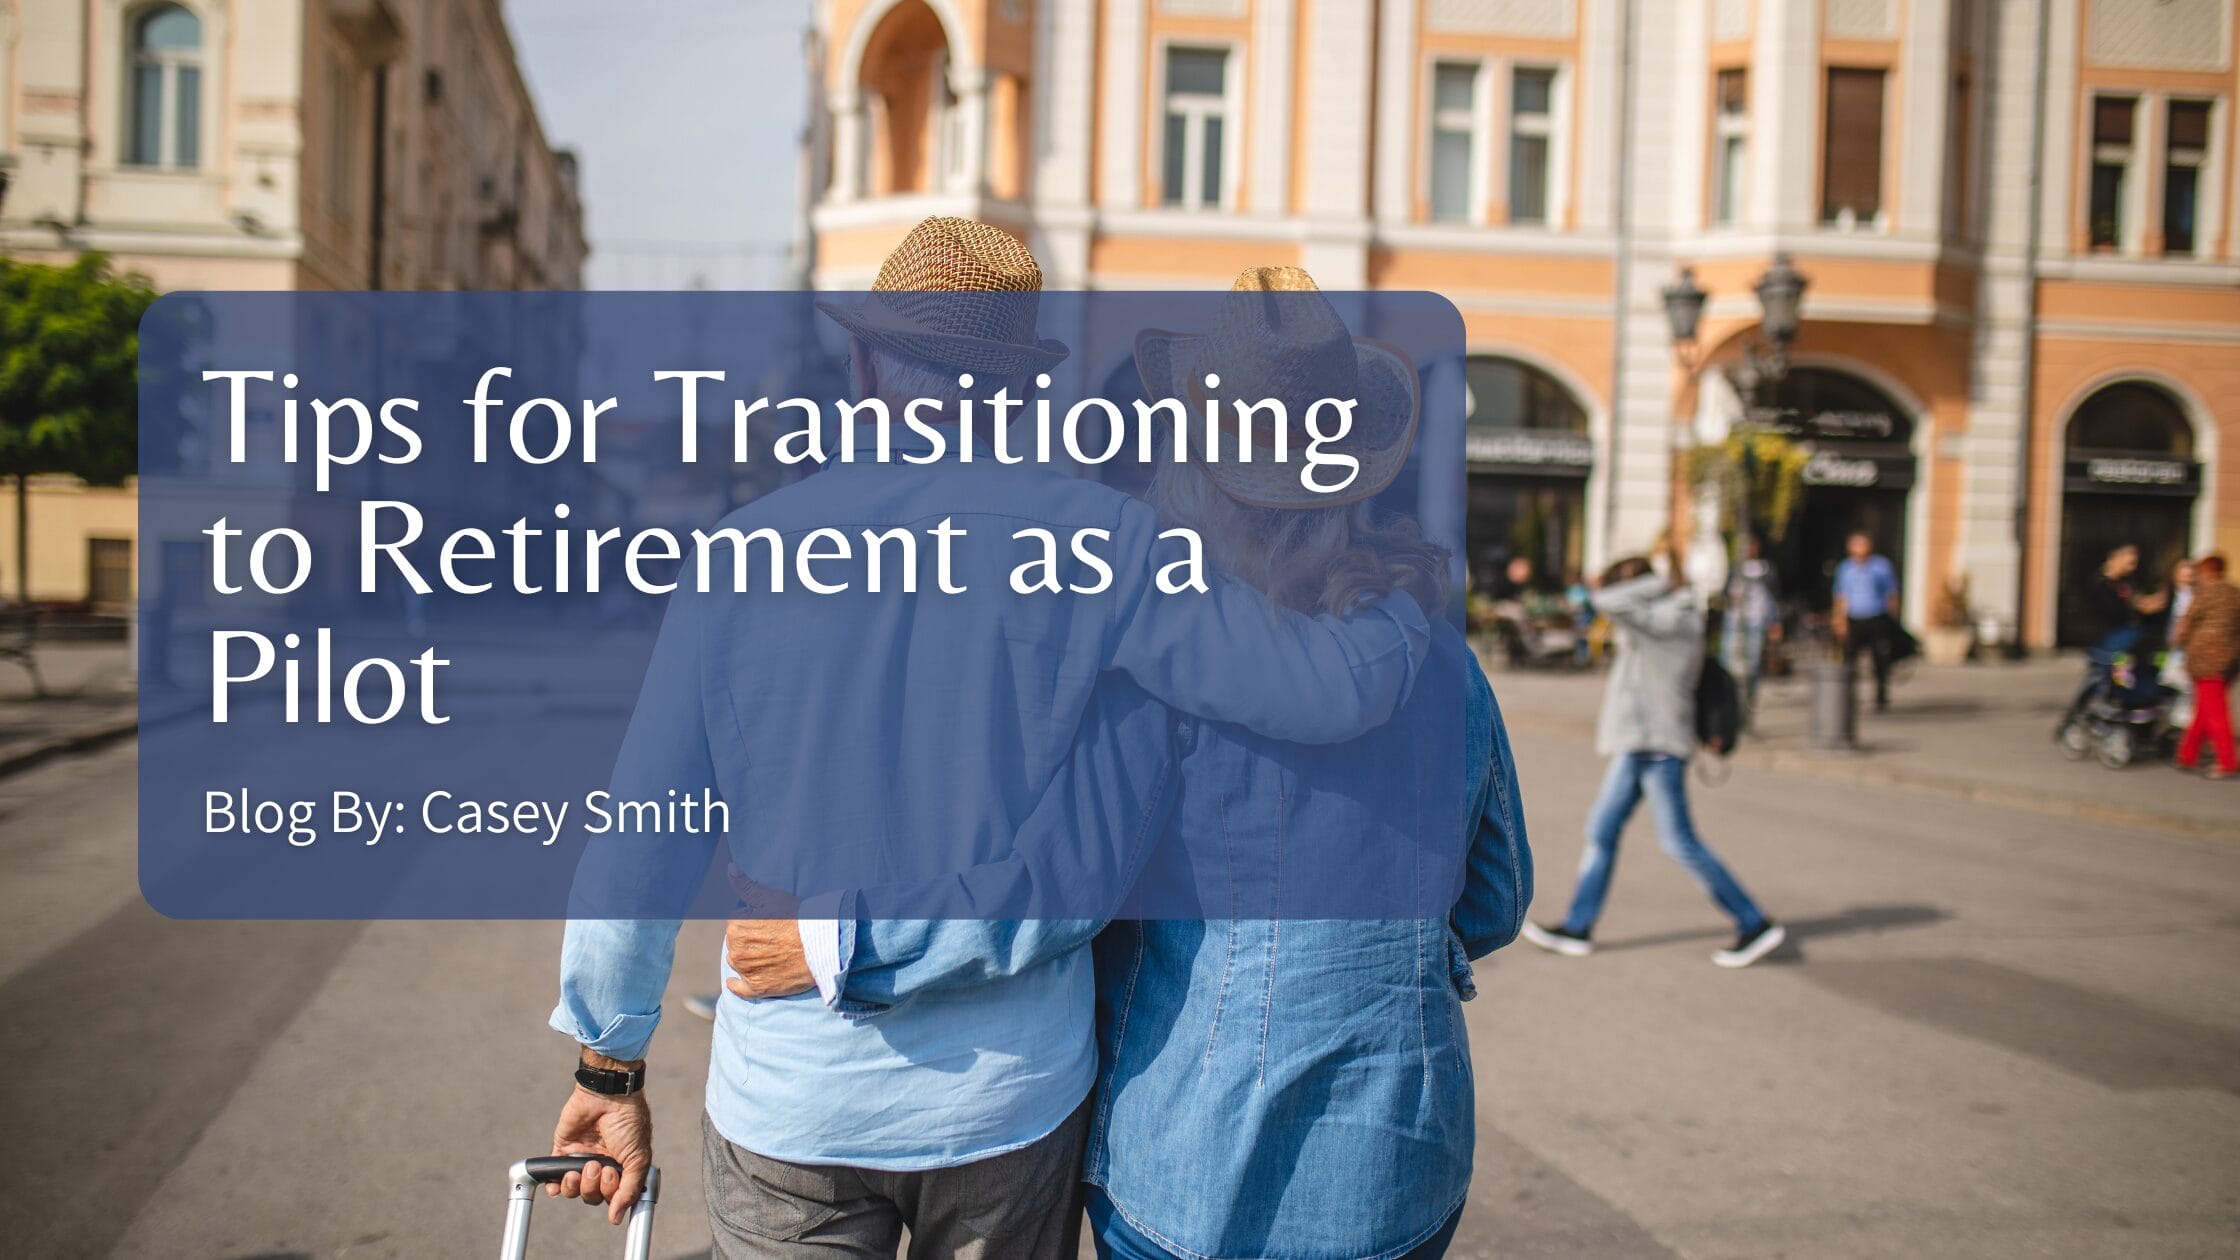 Tips for Transitioning to Retirement as a Pilot